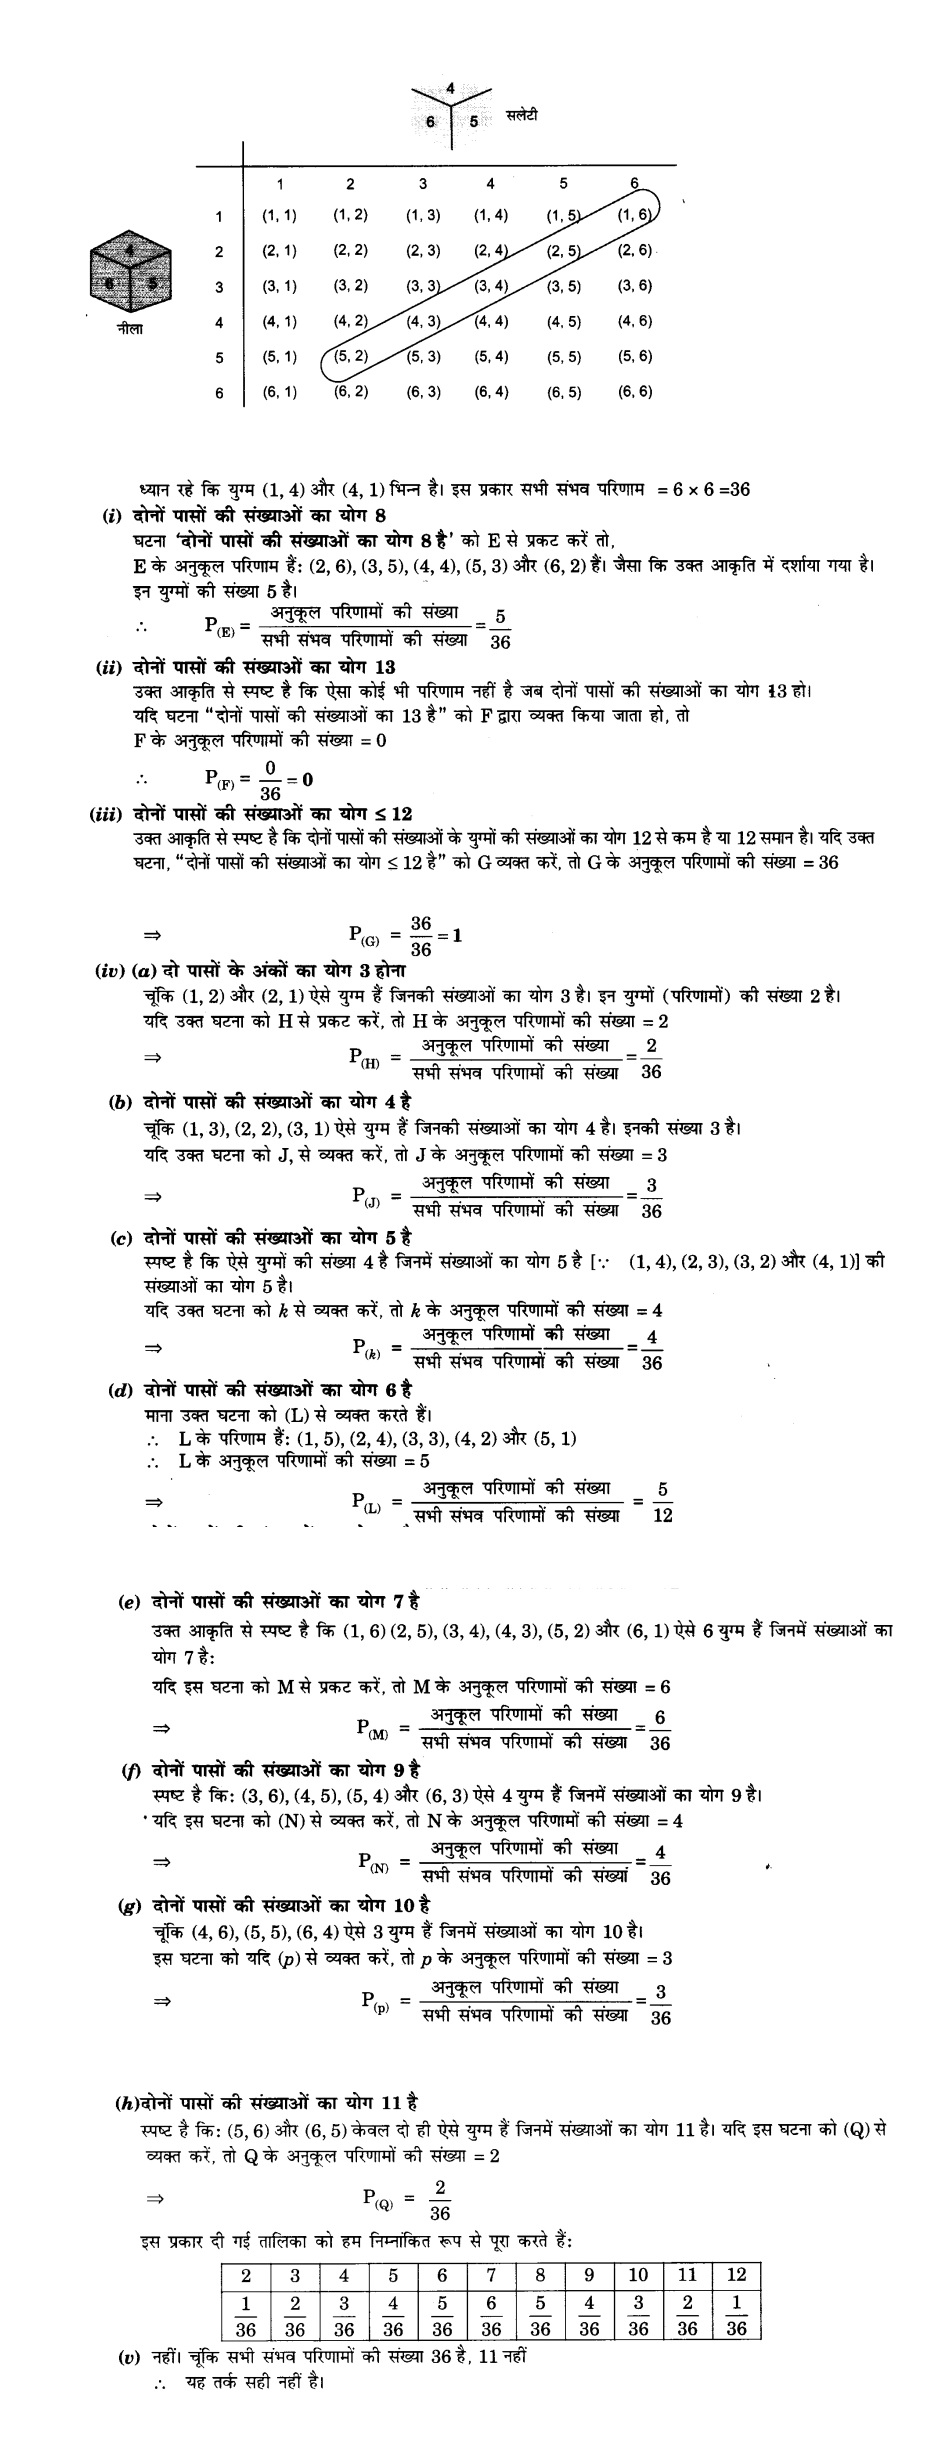 class 10 maths chapter 15 probability question no. 22 solutions